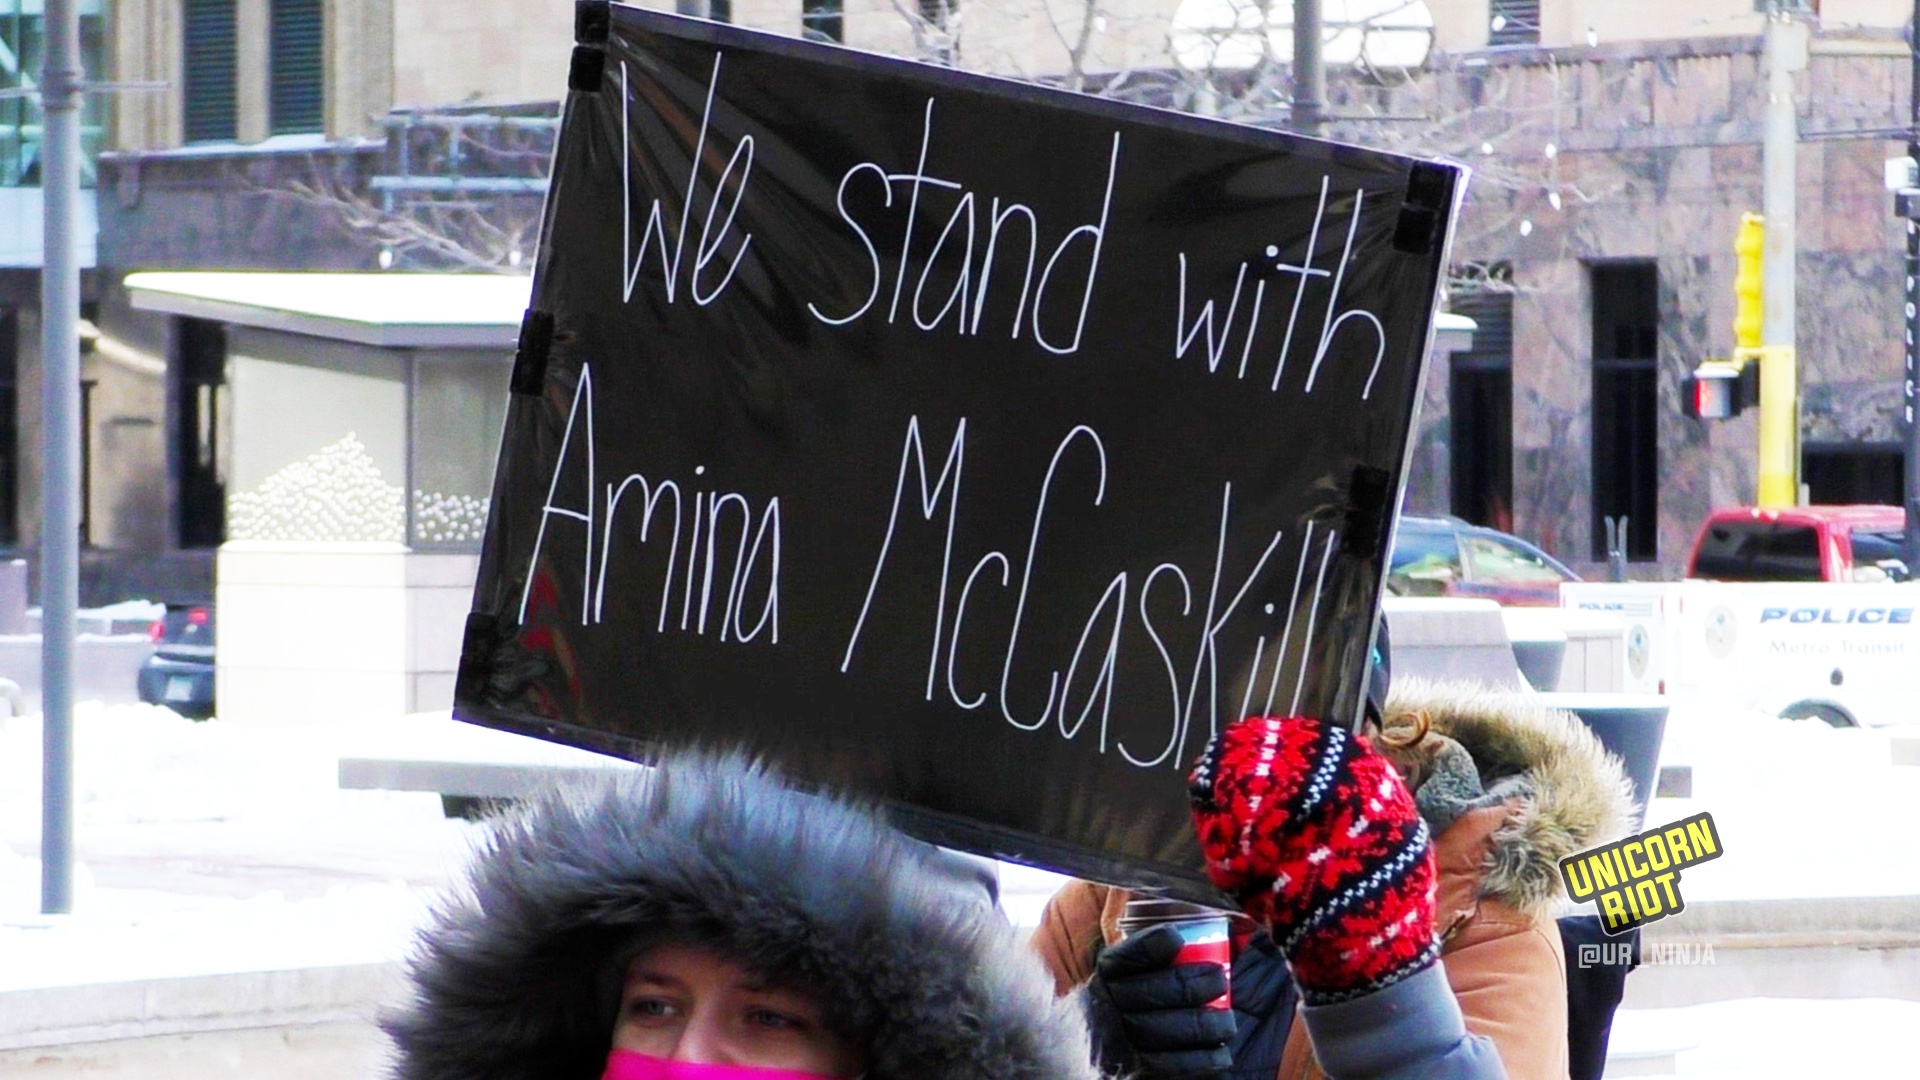 Sign reads "we stand with Amina McCaskill"